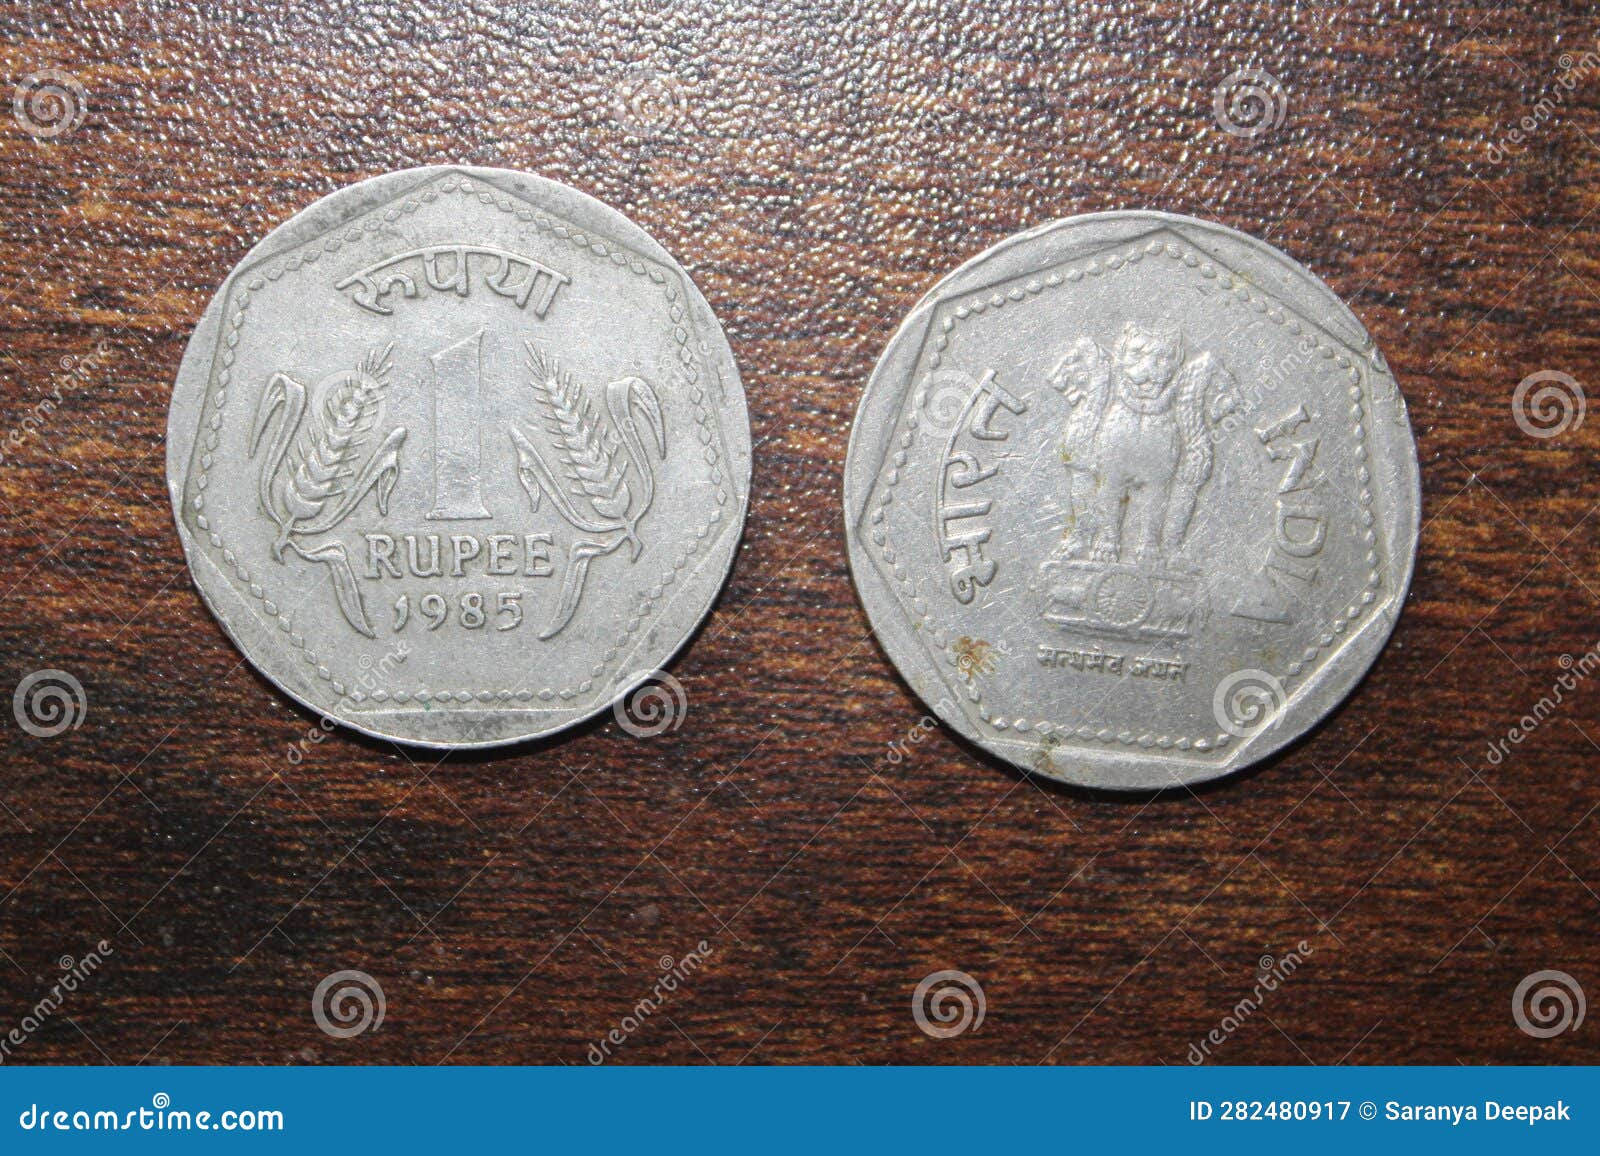 1 rupee coin stock image. Image of side, backside, rupee - 282480917